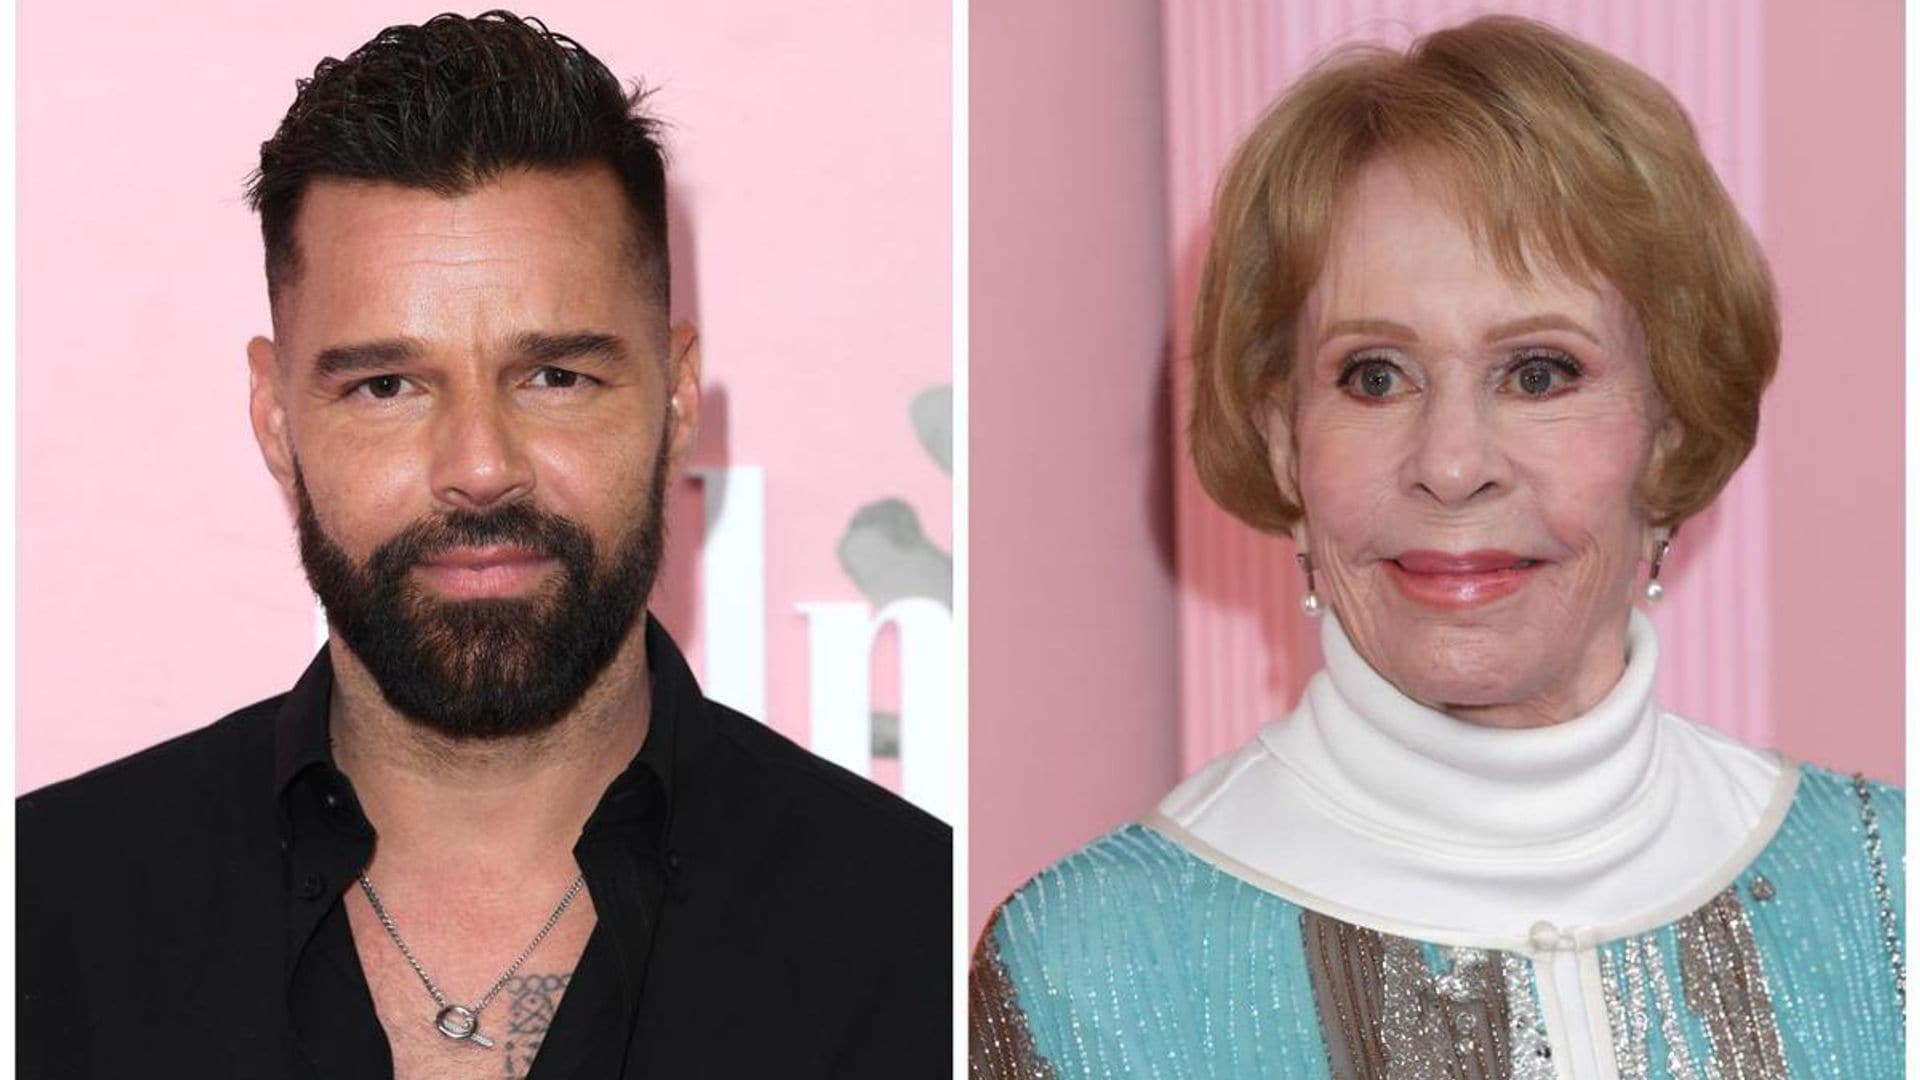 Ricky Martin and Carol Burnett’s chemistry in ‘Palm Royale’ will captivate audiences